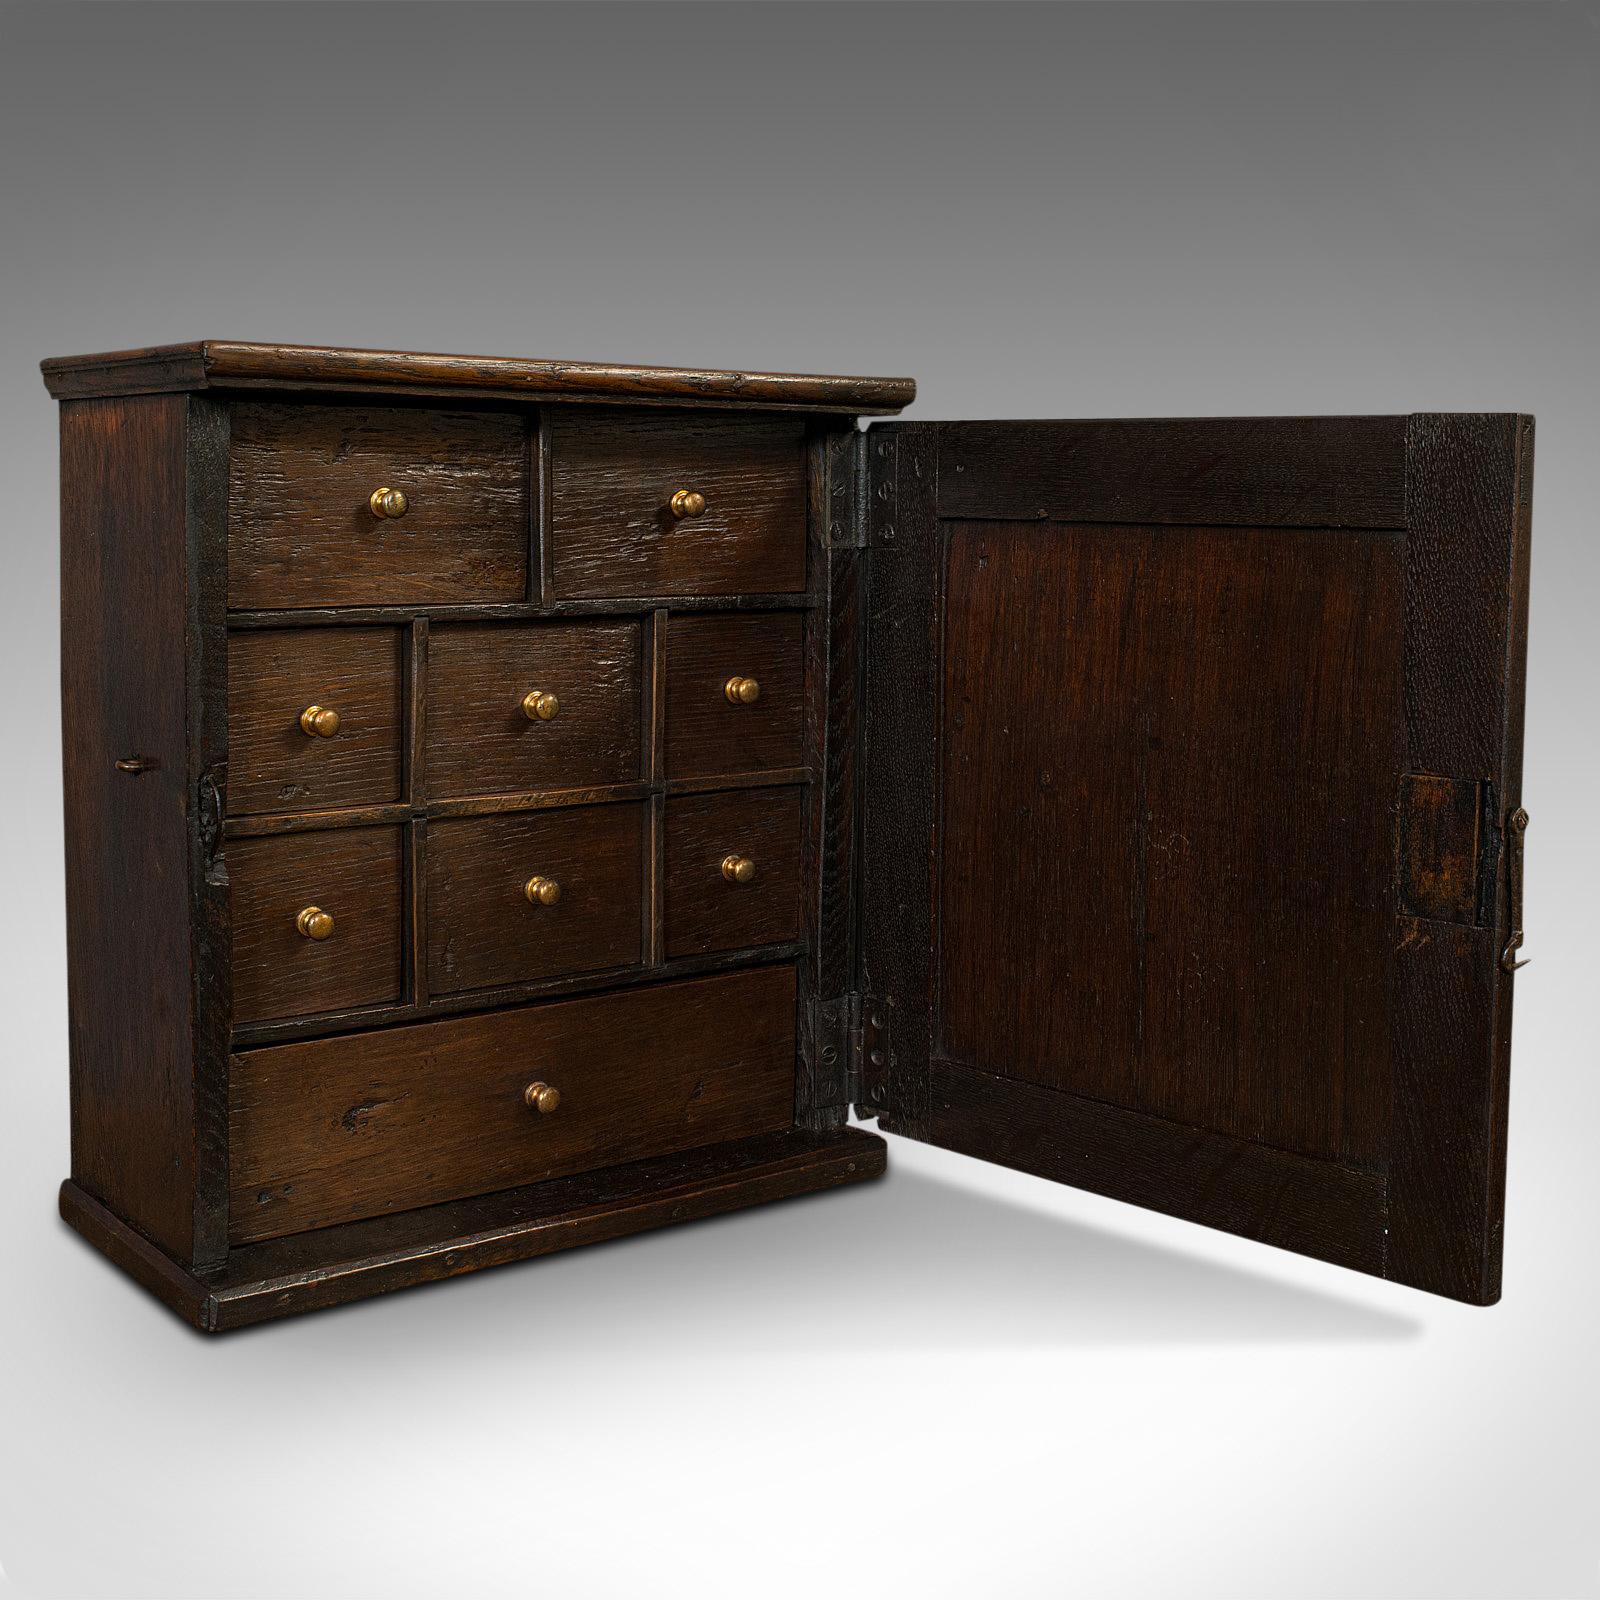 This is an antique tea cabinet. An English, oak spice or apothecary case, dating to the Georgian period, circa 1800.

Pleasingly heavy Georgian piece
Displays a desirable aged patina
Dark English oak with fine grain interest
Wisps of medullary